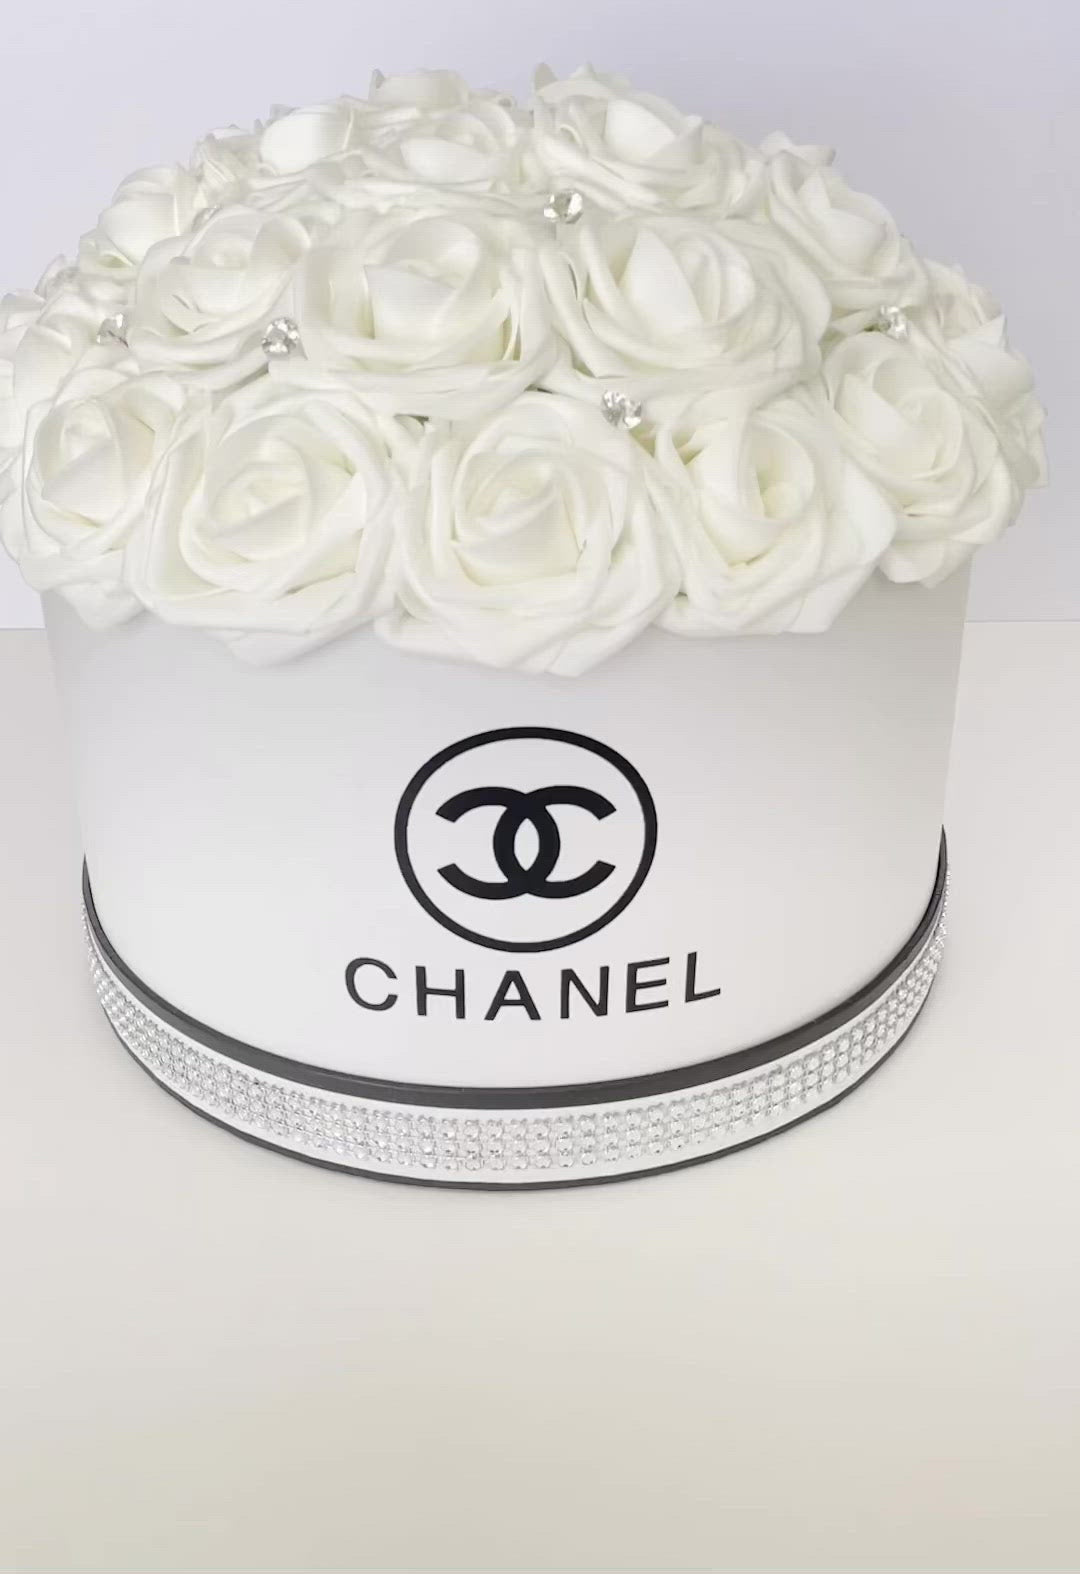 Chanel Rose Box – Spring Flowers & Gifts